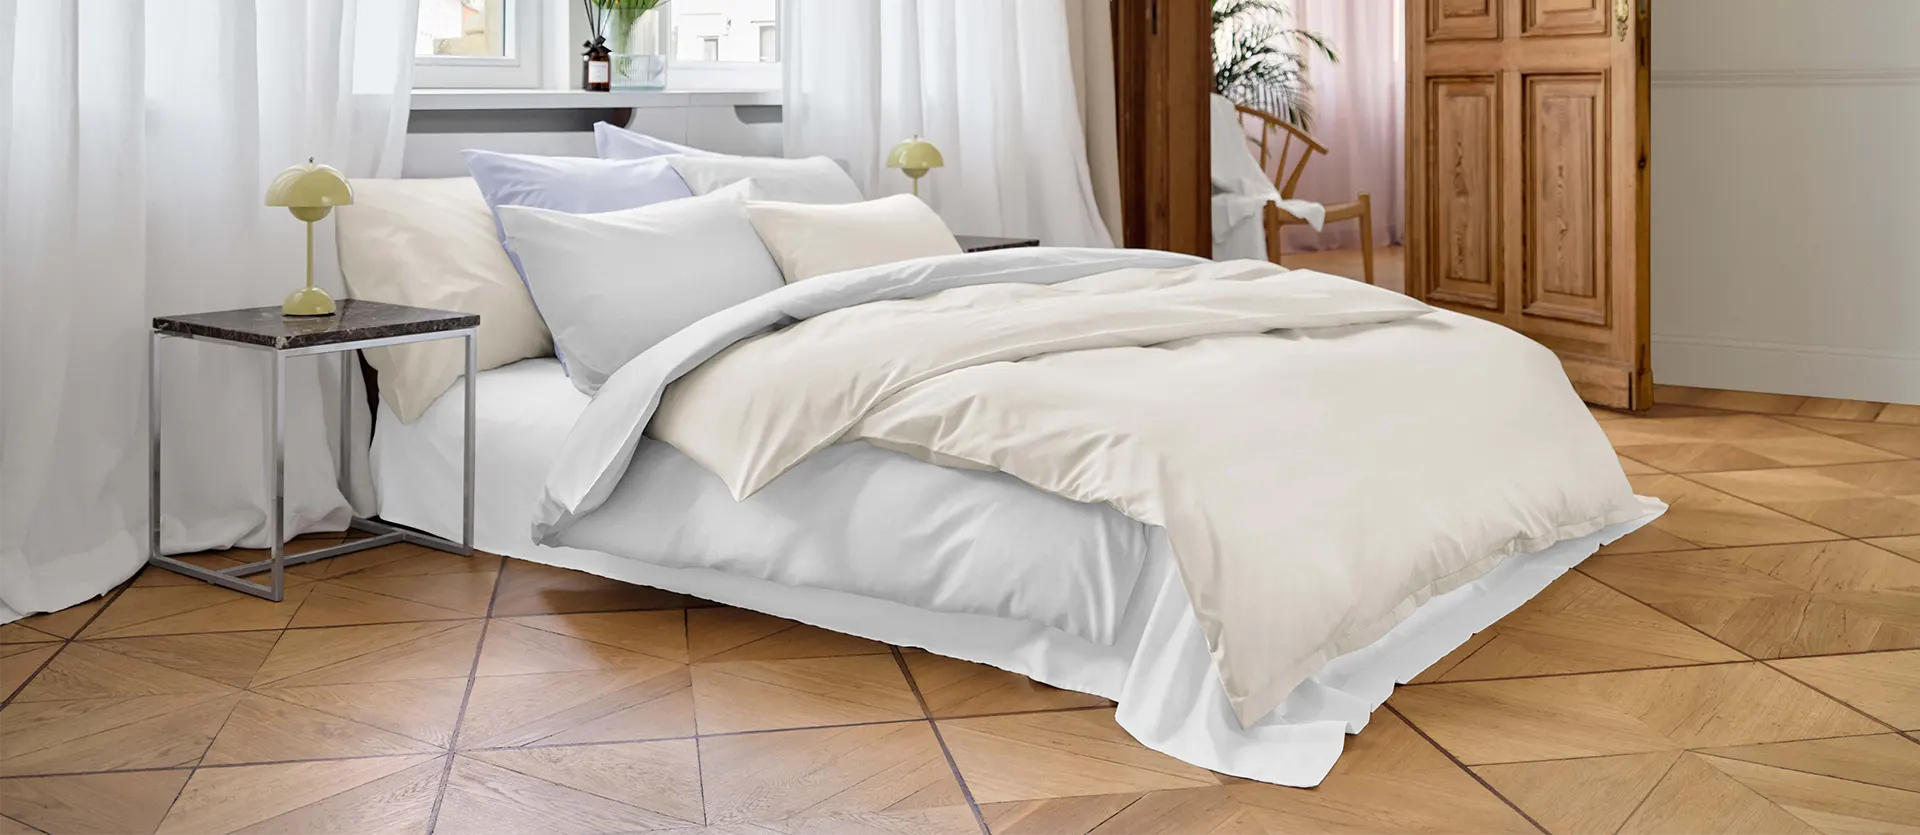 Bed linen for warm nights